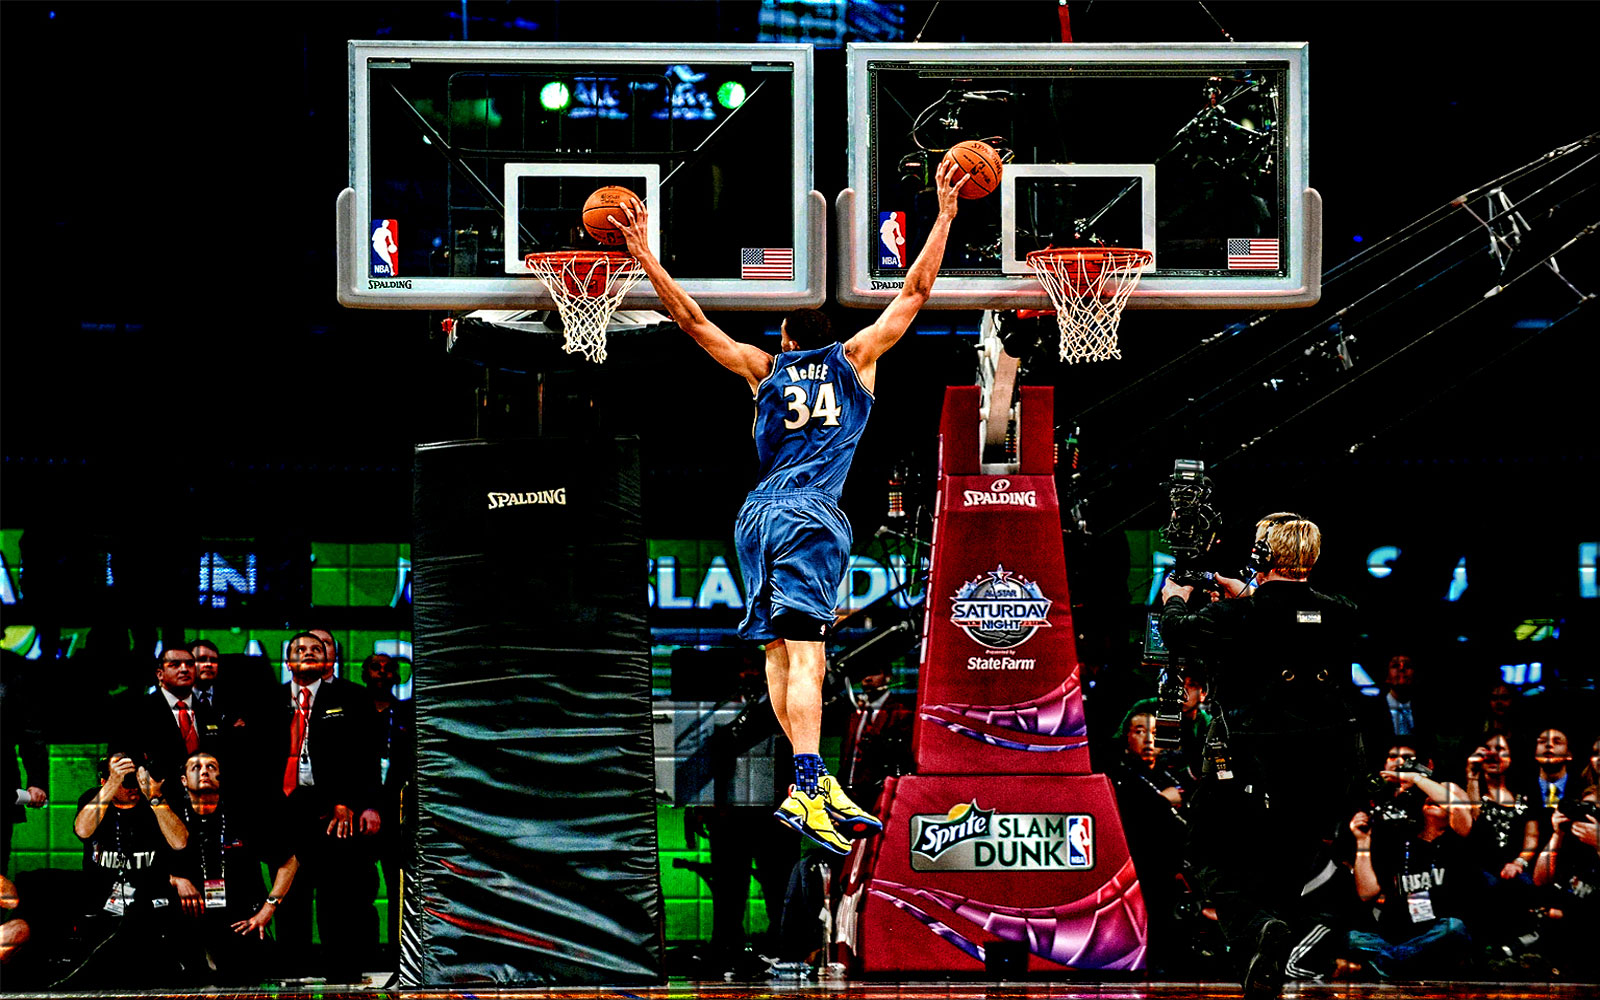 JaVale McGee Double Dunk Widescreen Wallpaper1600 x 1000